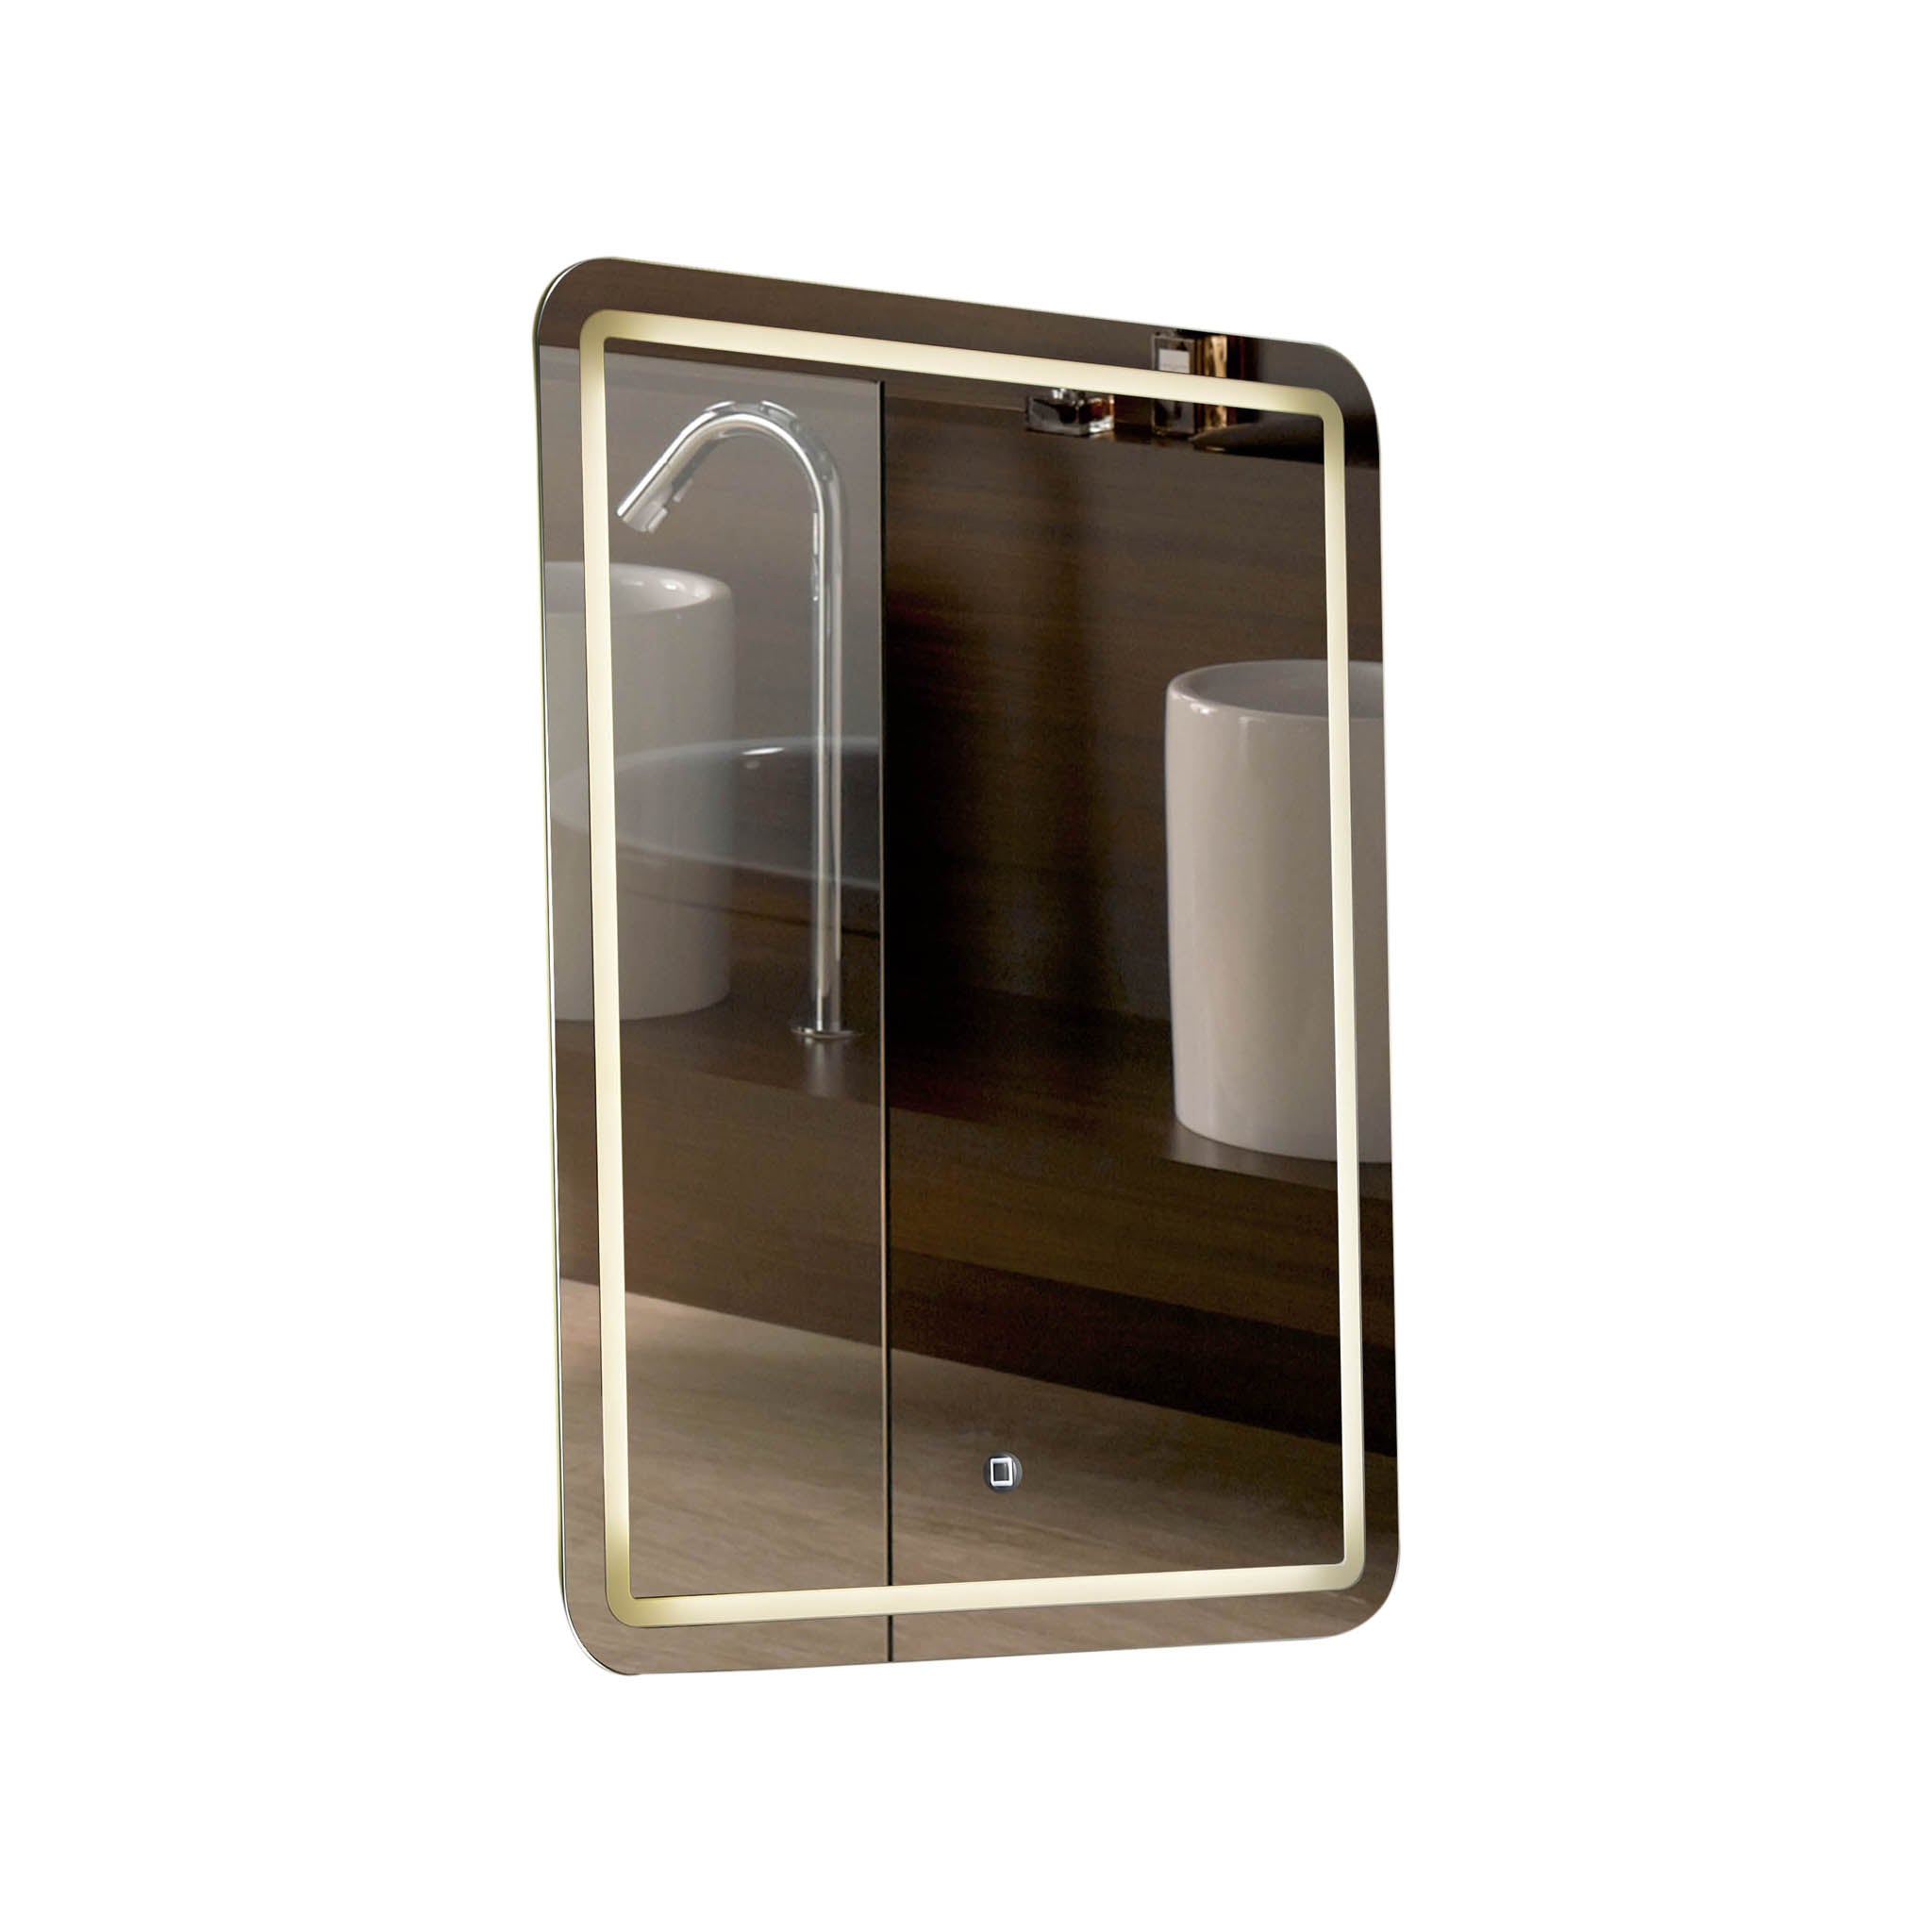 Aquamoon LED Mirror 1989 With Touch On/Off Button, Round Corner Design With Front and Back Illumination 72W x 36H